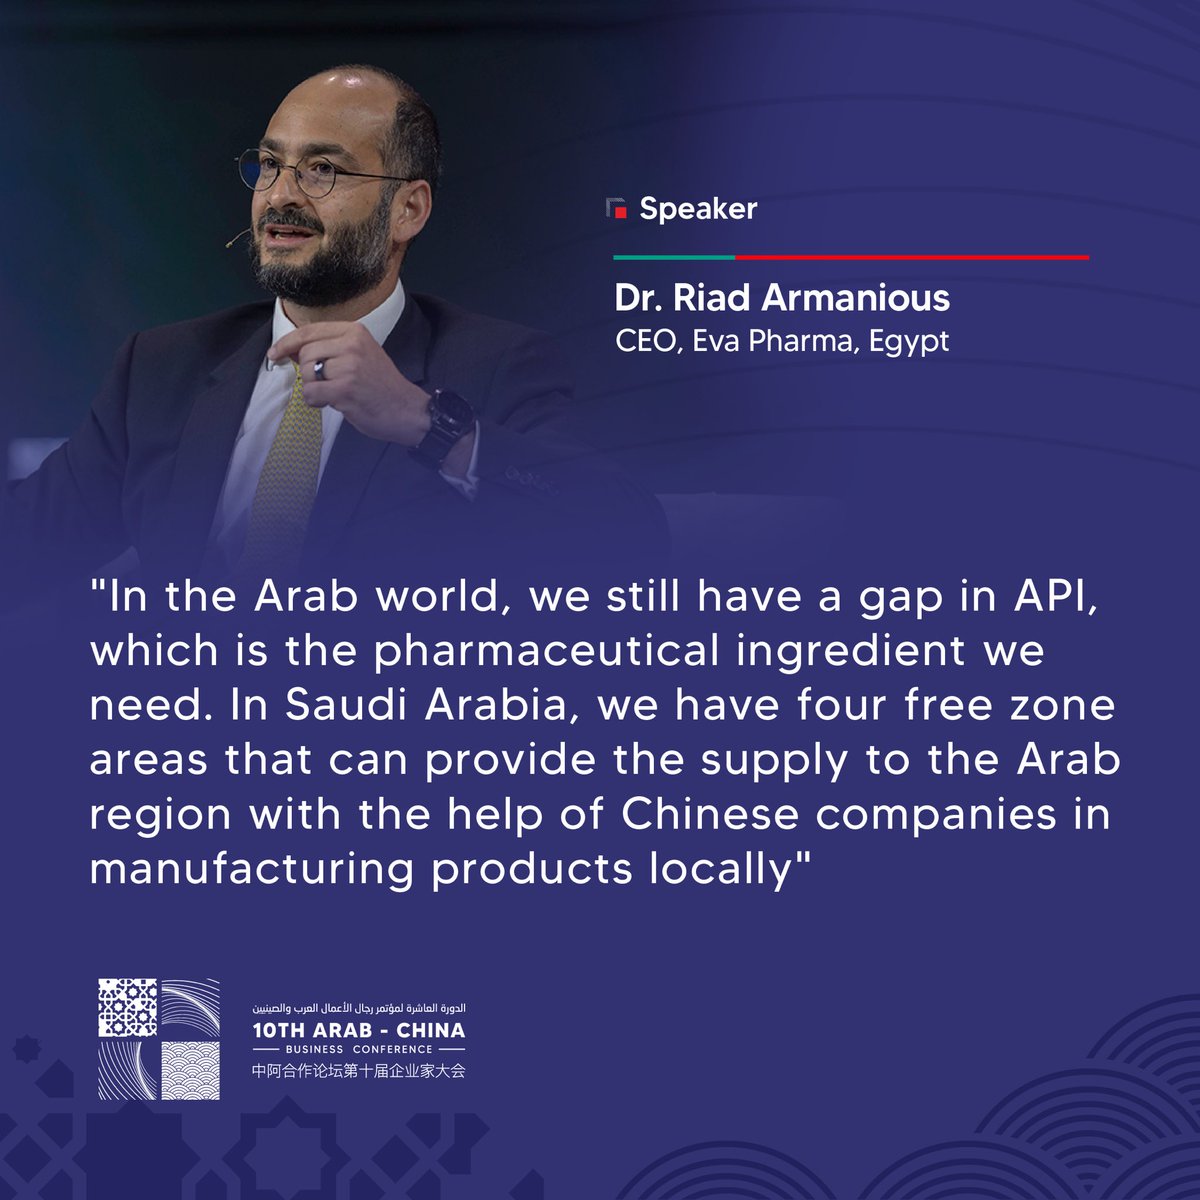 Dr. Riad Armanious, CEO @EvaPharma_, recognizes the responsibility towards patients & emphasizes the shift towards personalized medicine. Eva Pharma is ready to engage in collaborations & harness the power of tools, capabilities & tech to benefit patients. #ArabChinaConference